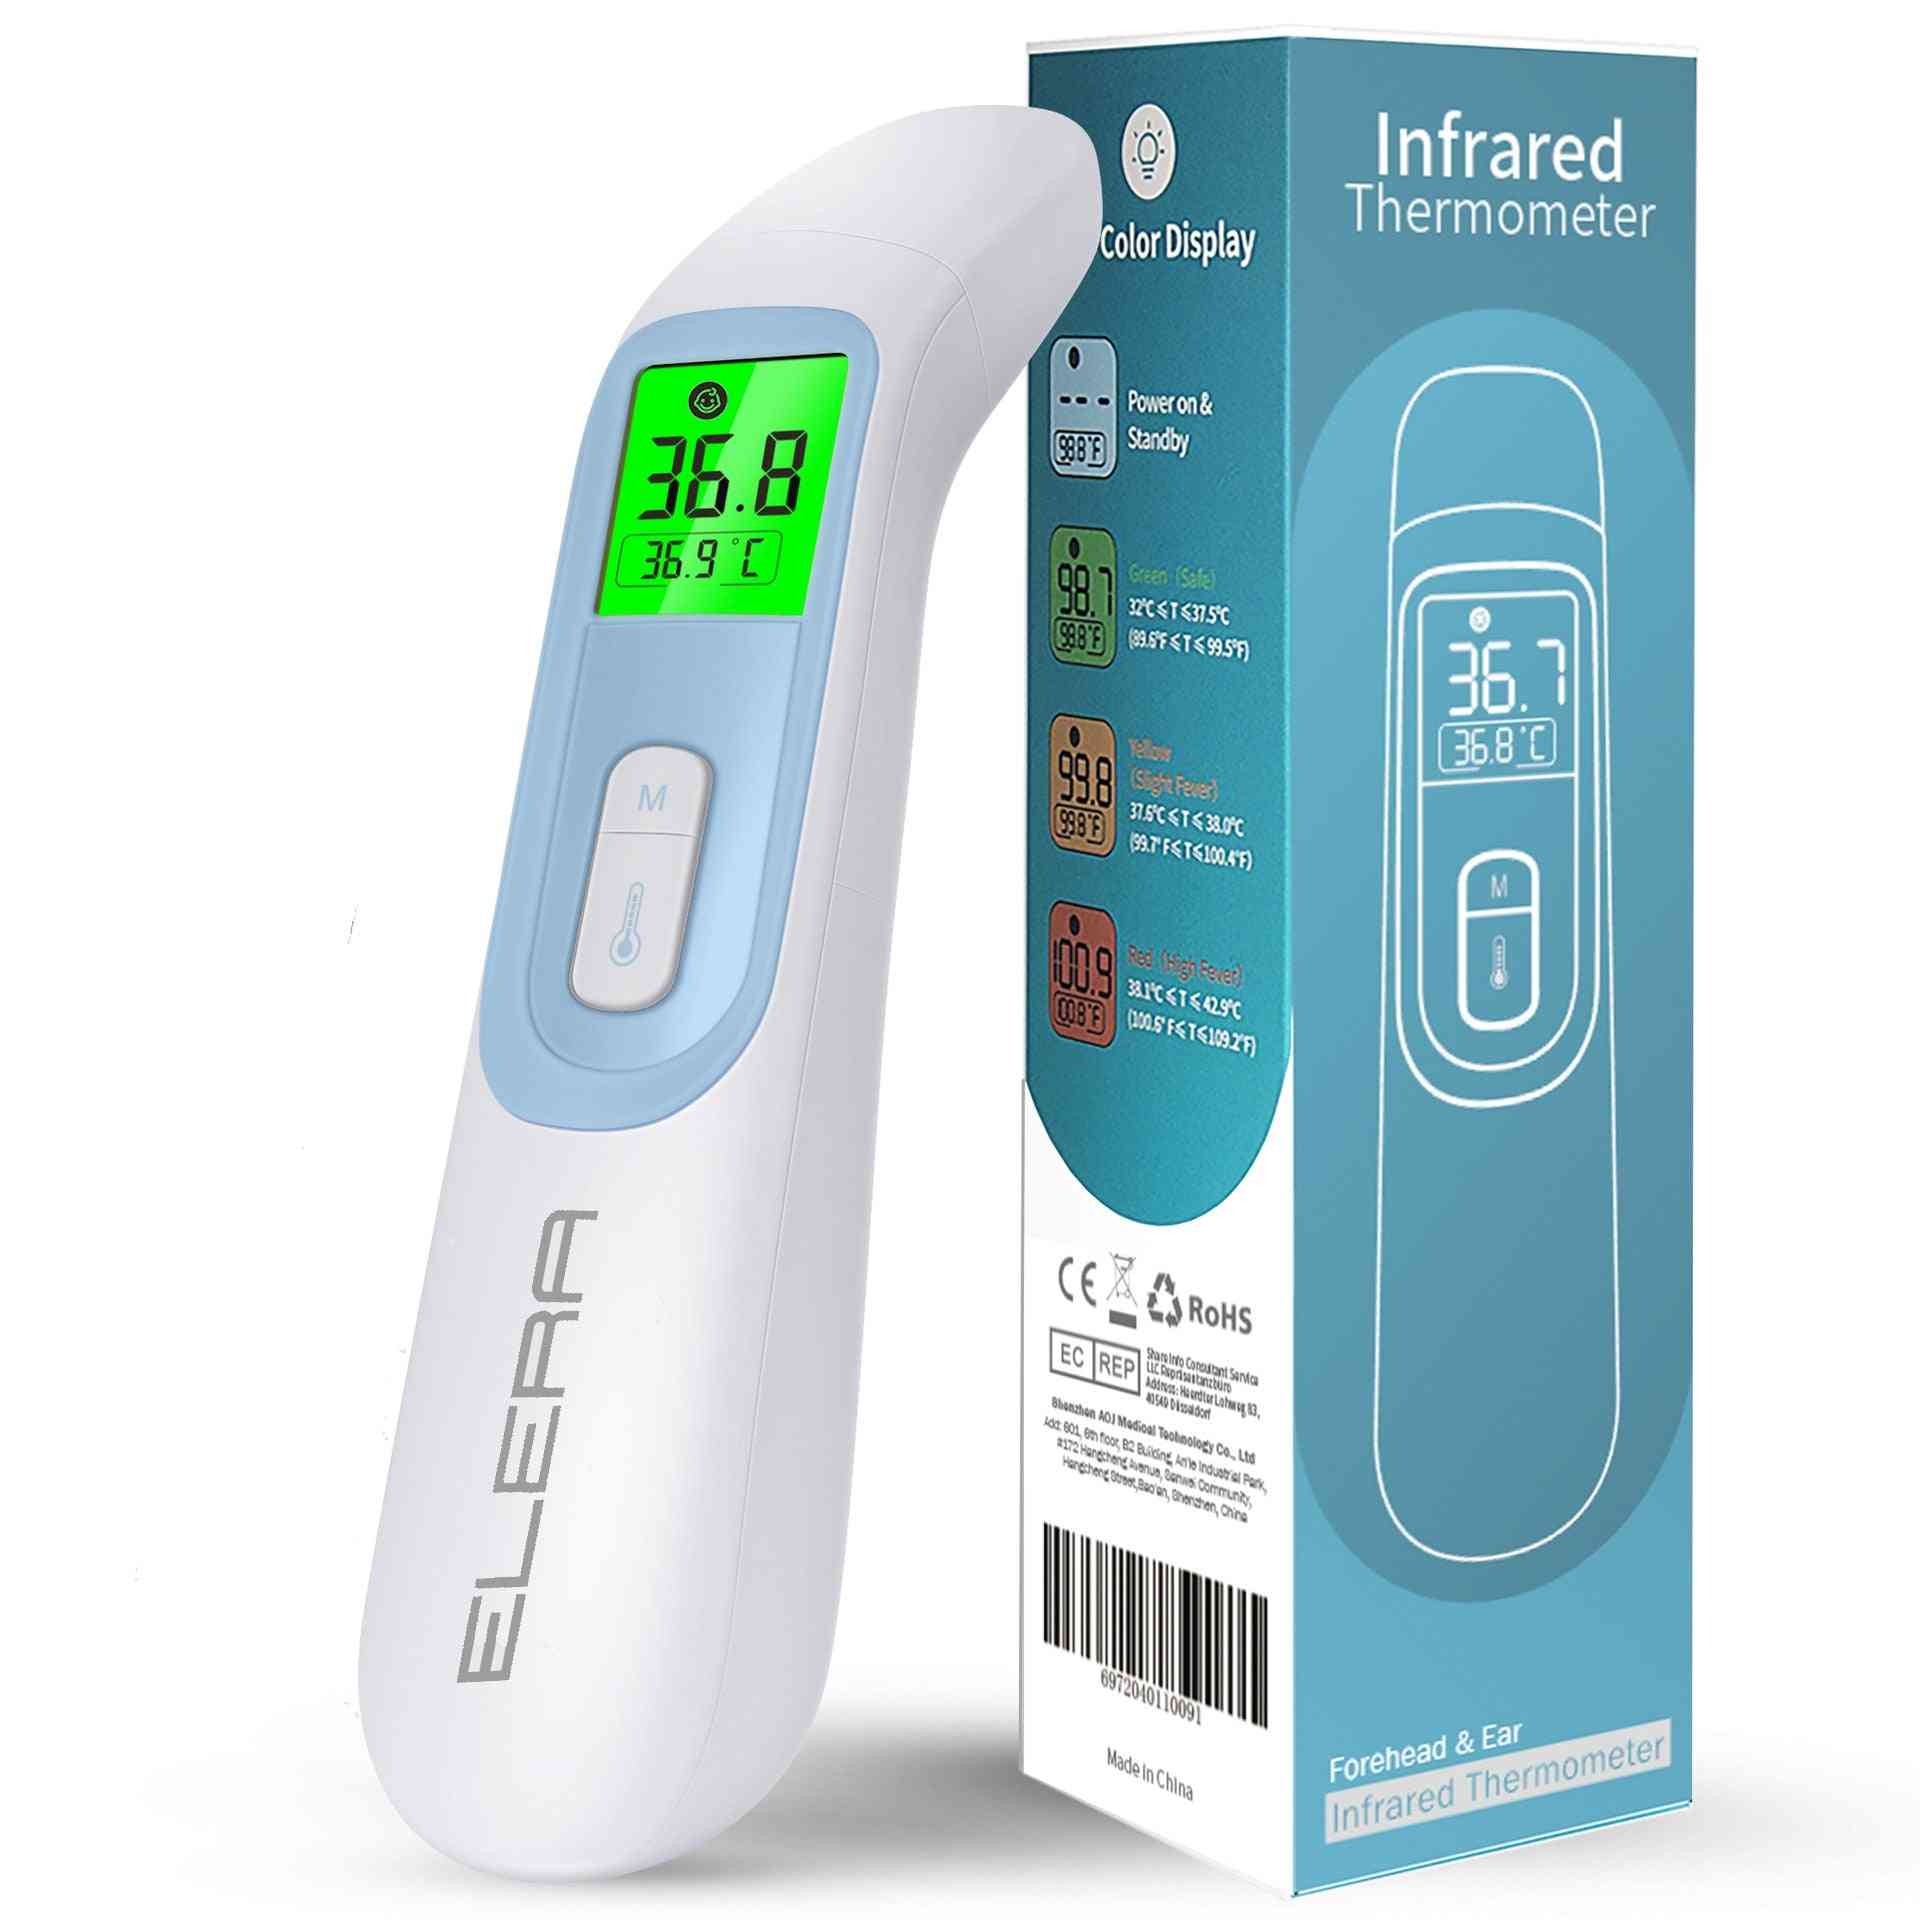 Baby Forehead Ear Infrared Thermometer